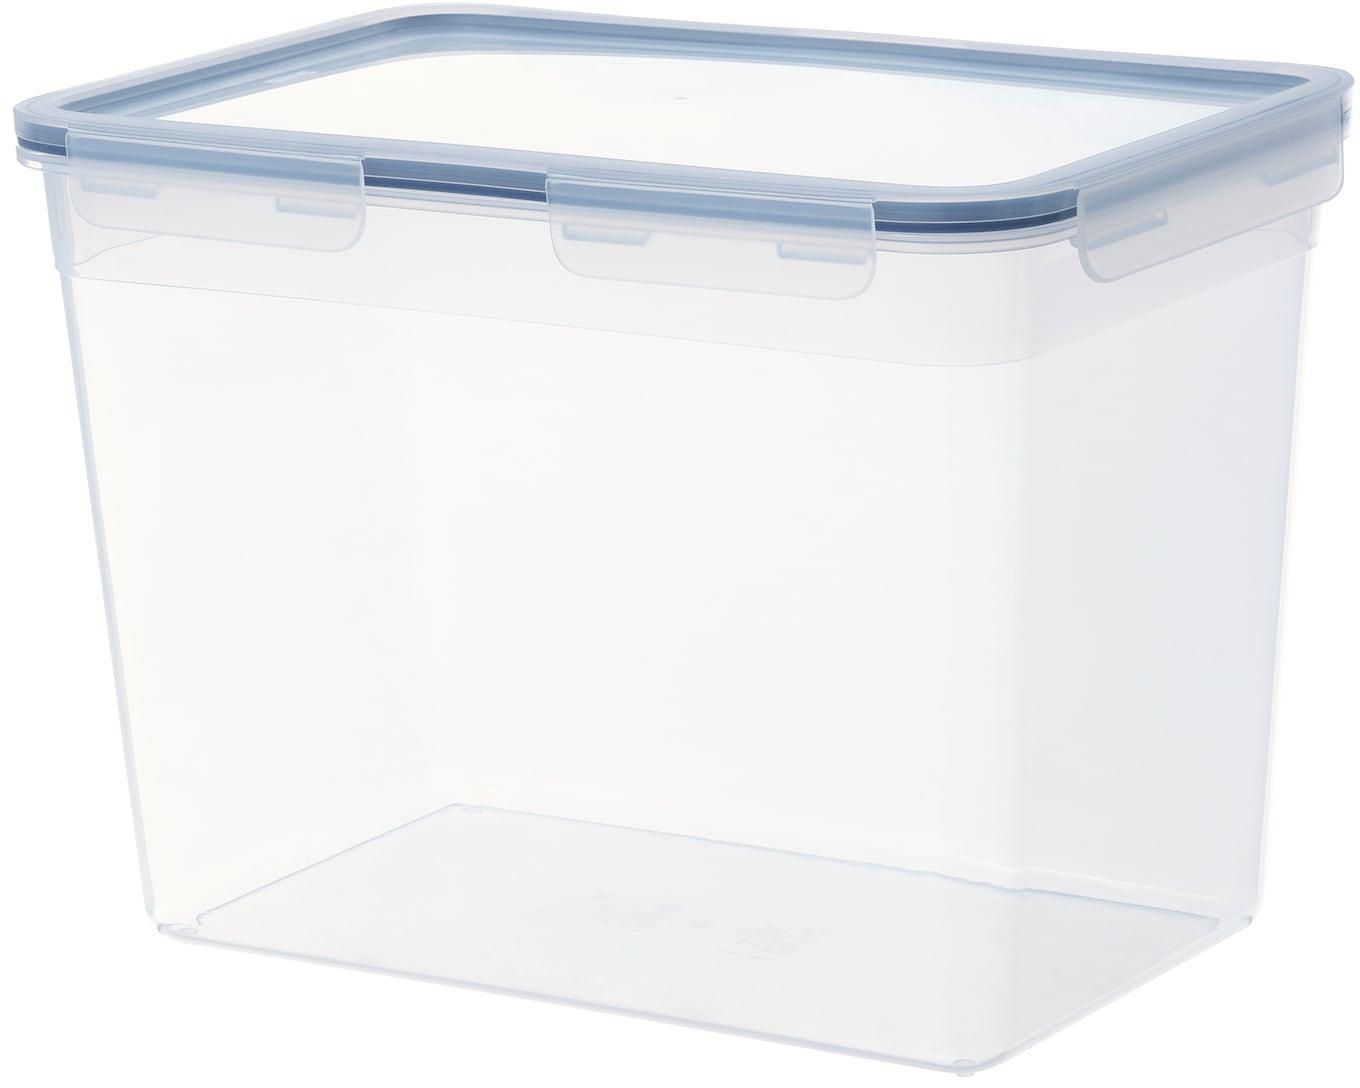 IKEA 365+ Food container with lid - rectangular/plastic 10.6 l